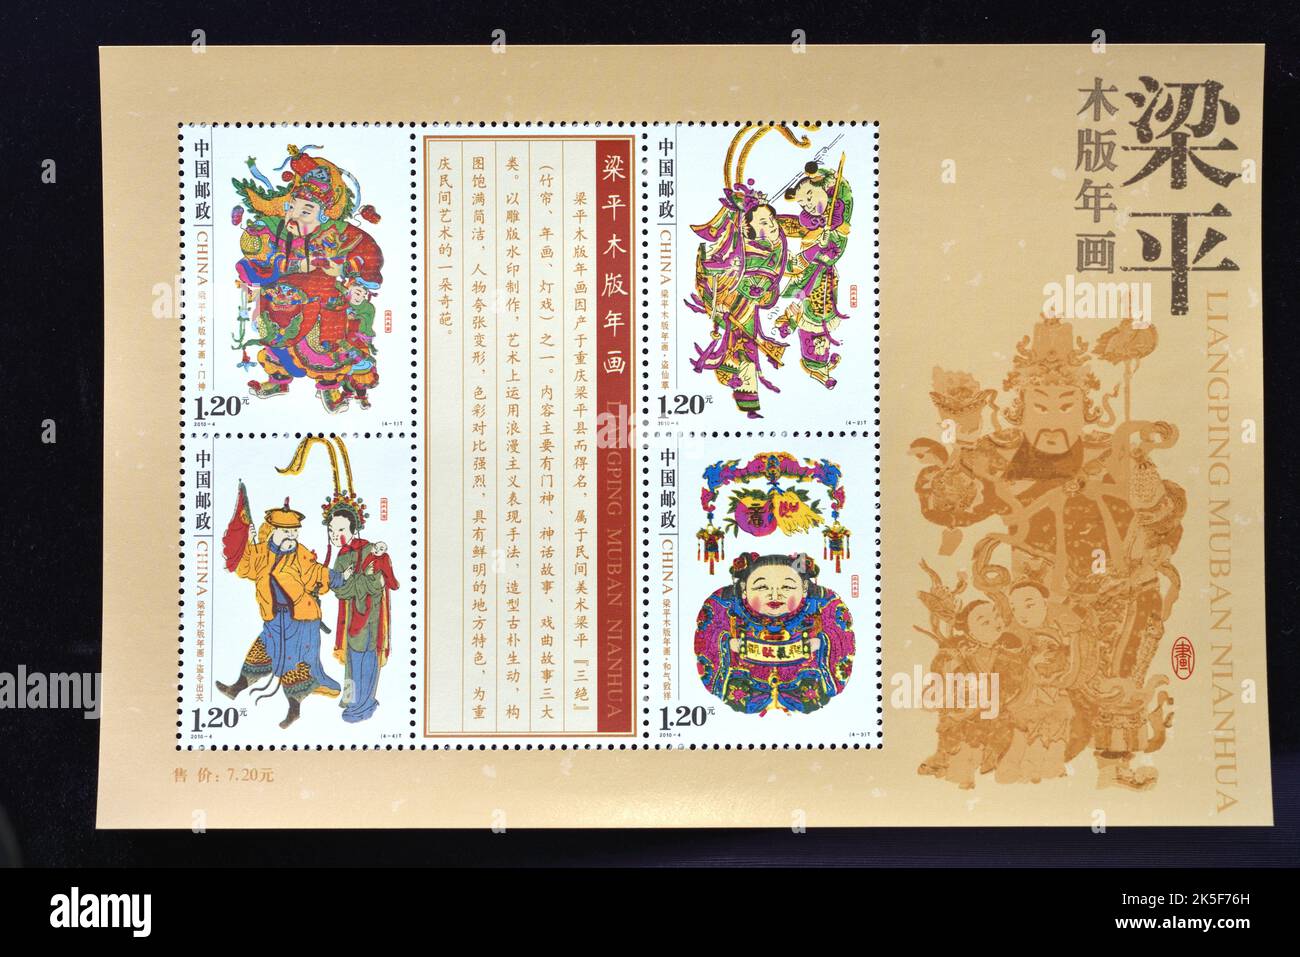 CHINA - CIRCA 2010: A stamp printed in China shows 2010-4 Liangping New Year Woodprints Gate God Stealing the Immortal Grass Exiting the Pass with a s Stock Photo